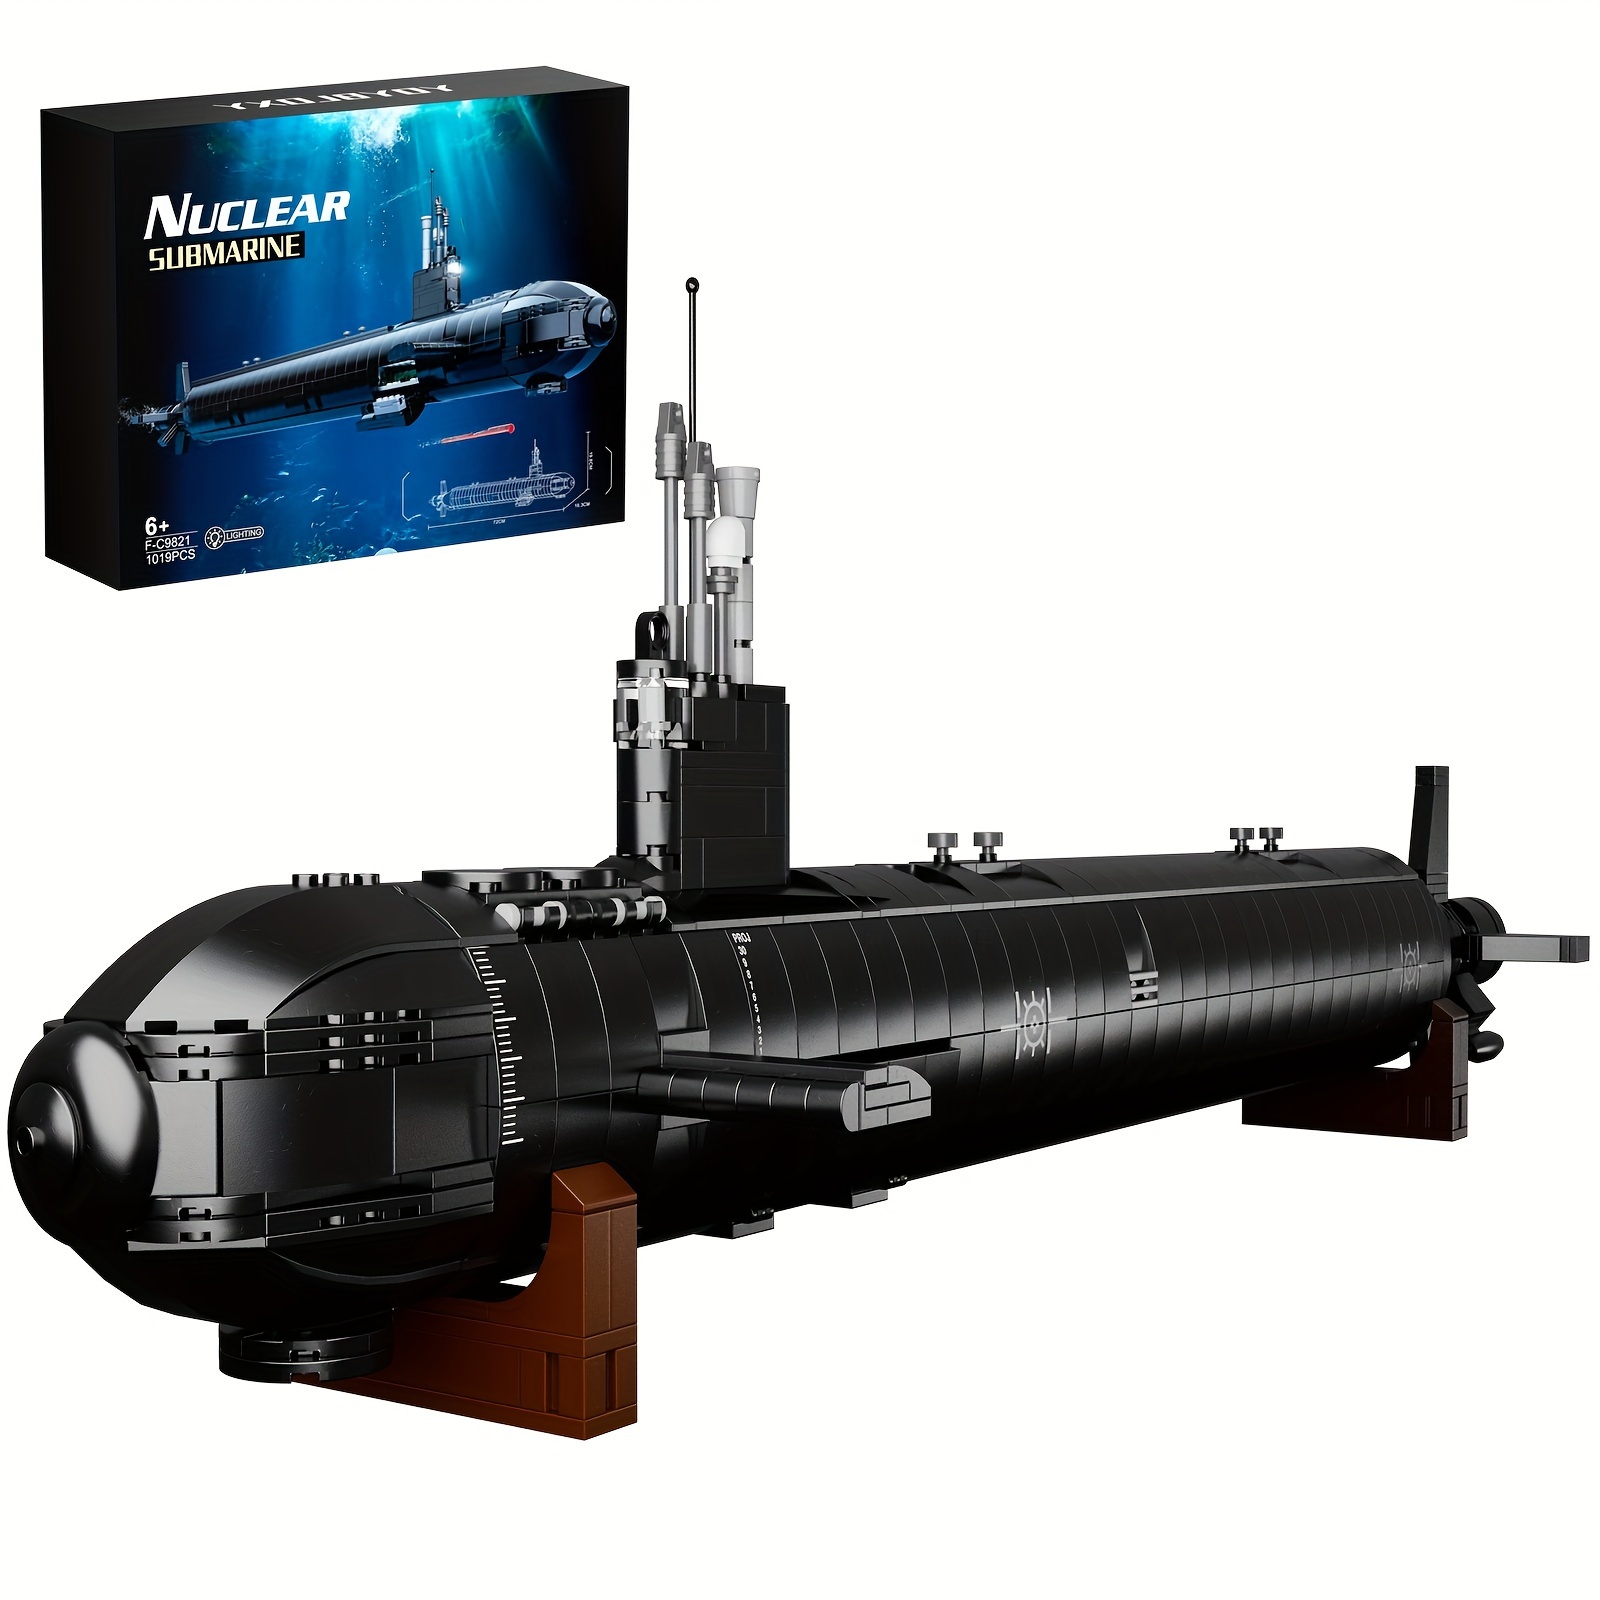 

1019pcs Fogini Attack Submarine Block Model - Highly Precise - Challenging Building Sets - Ornaments - Exquisite Box + Instruction Manual = The Best Gift For Block Collectors!